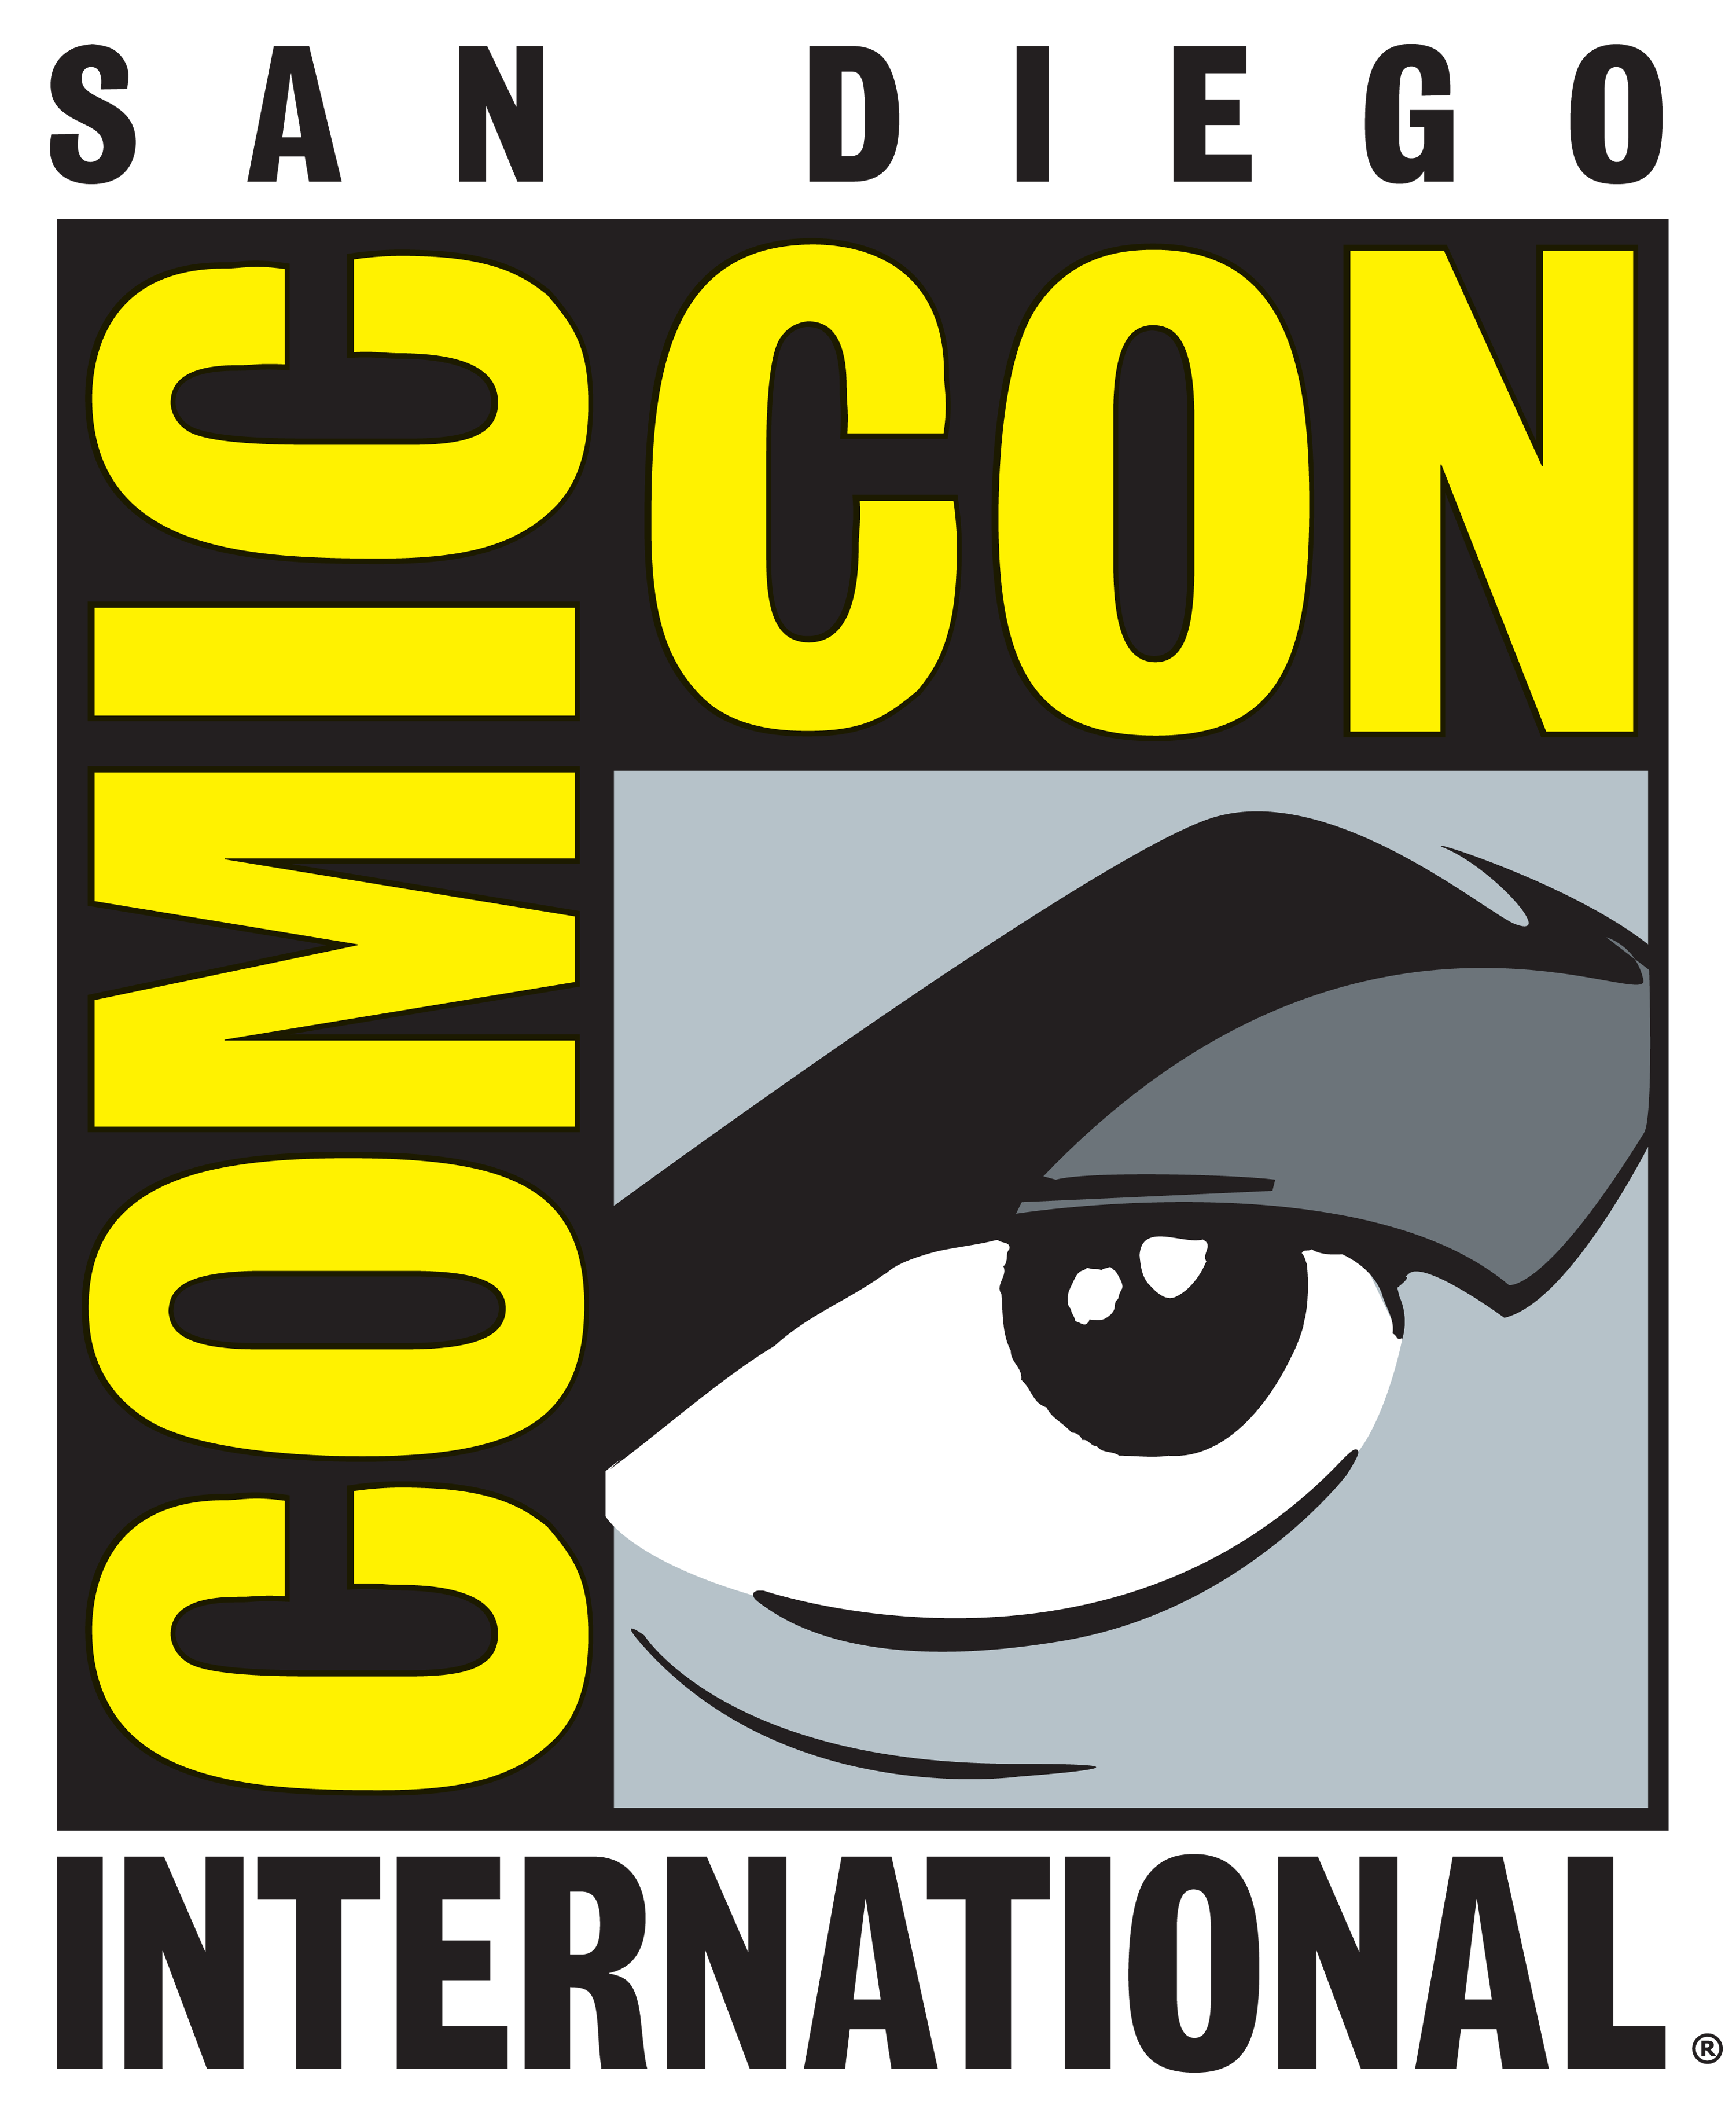 NECAOnline.com | NECA, KIDROBOT, RUBIE’S BEN COOPER, AND DENUO NOVO INVADE SAN DIEGO COMIC-CON WITH NEW EXCLUSIVES, GIVEAWAYS AND ACTIVATIONS!